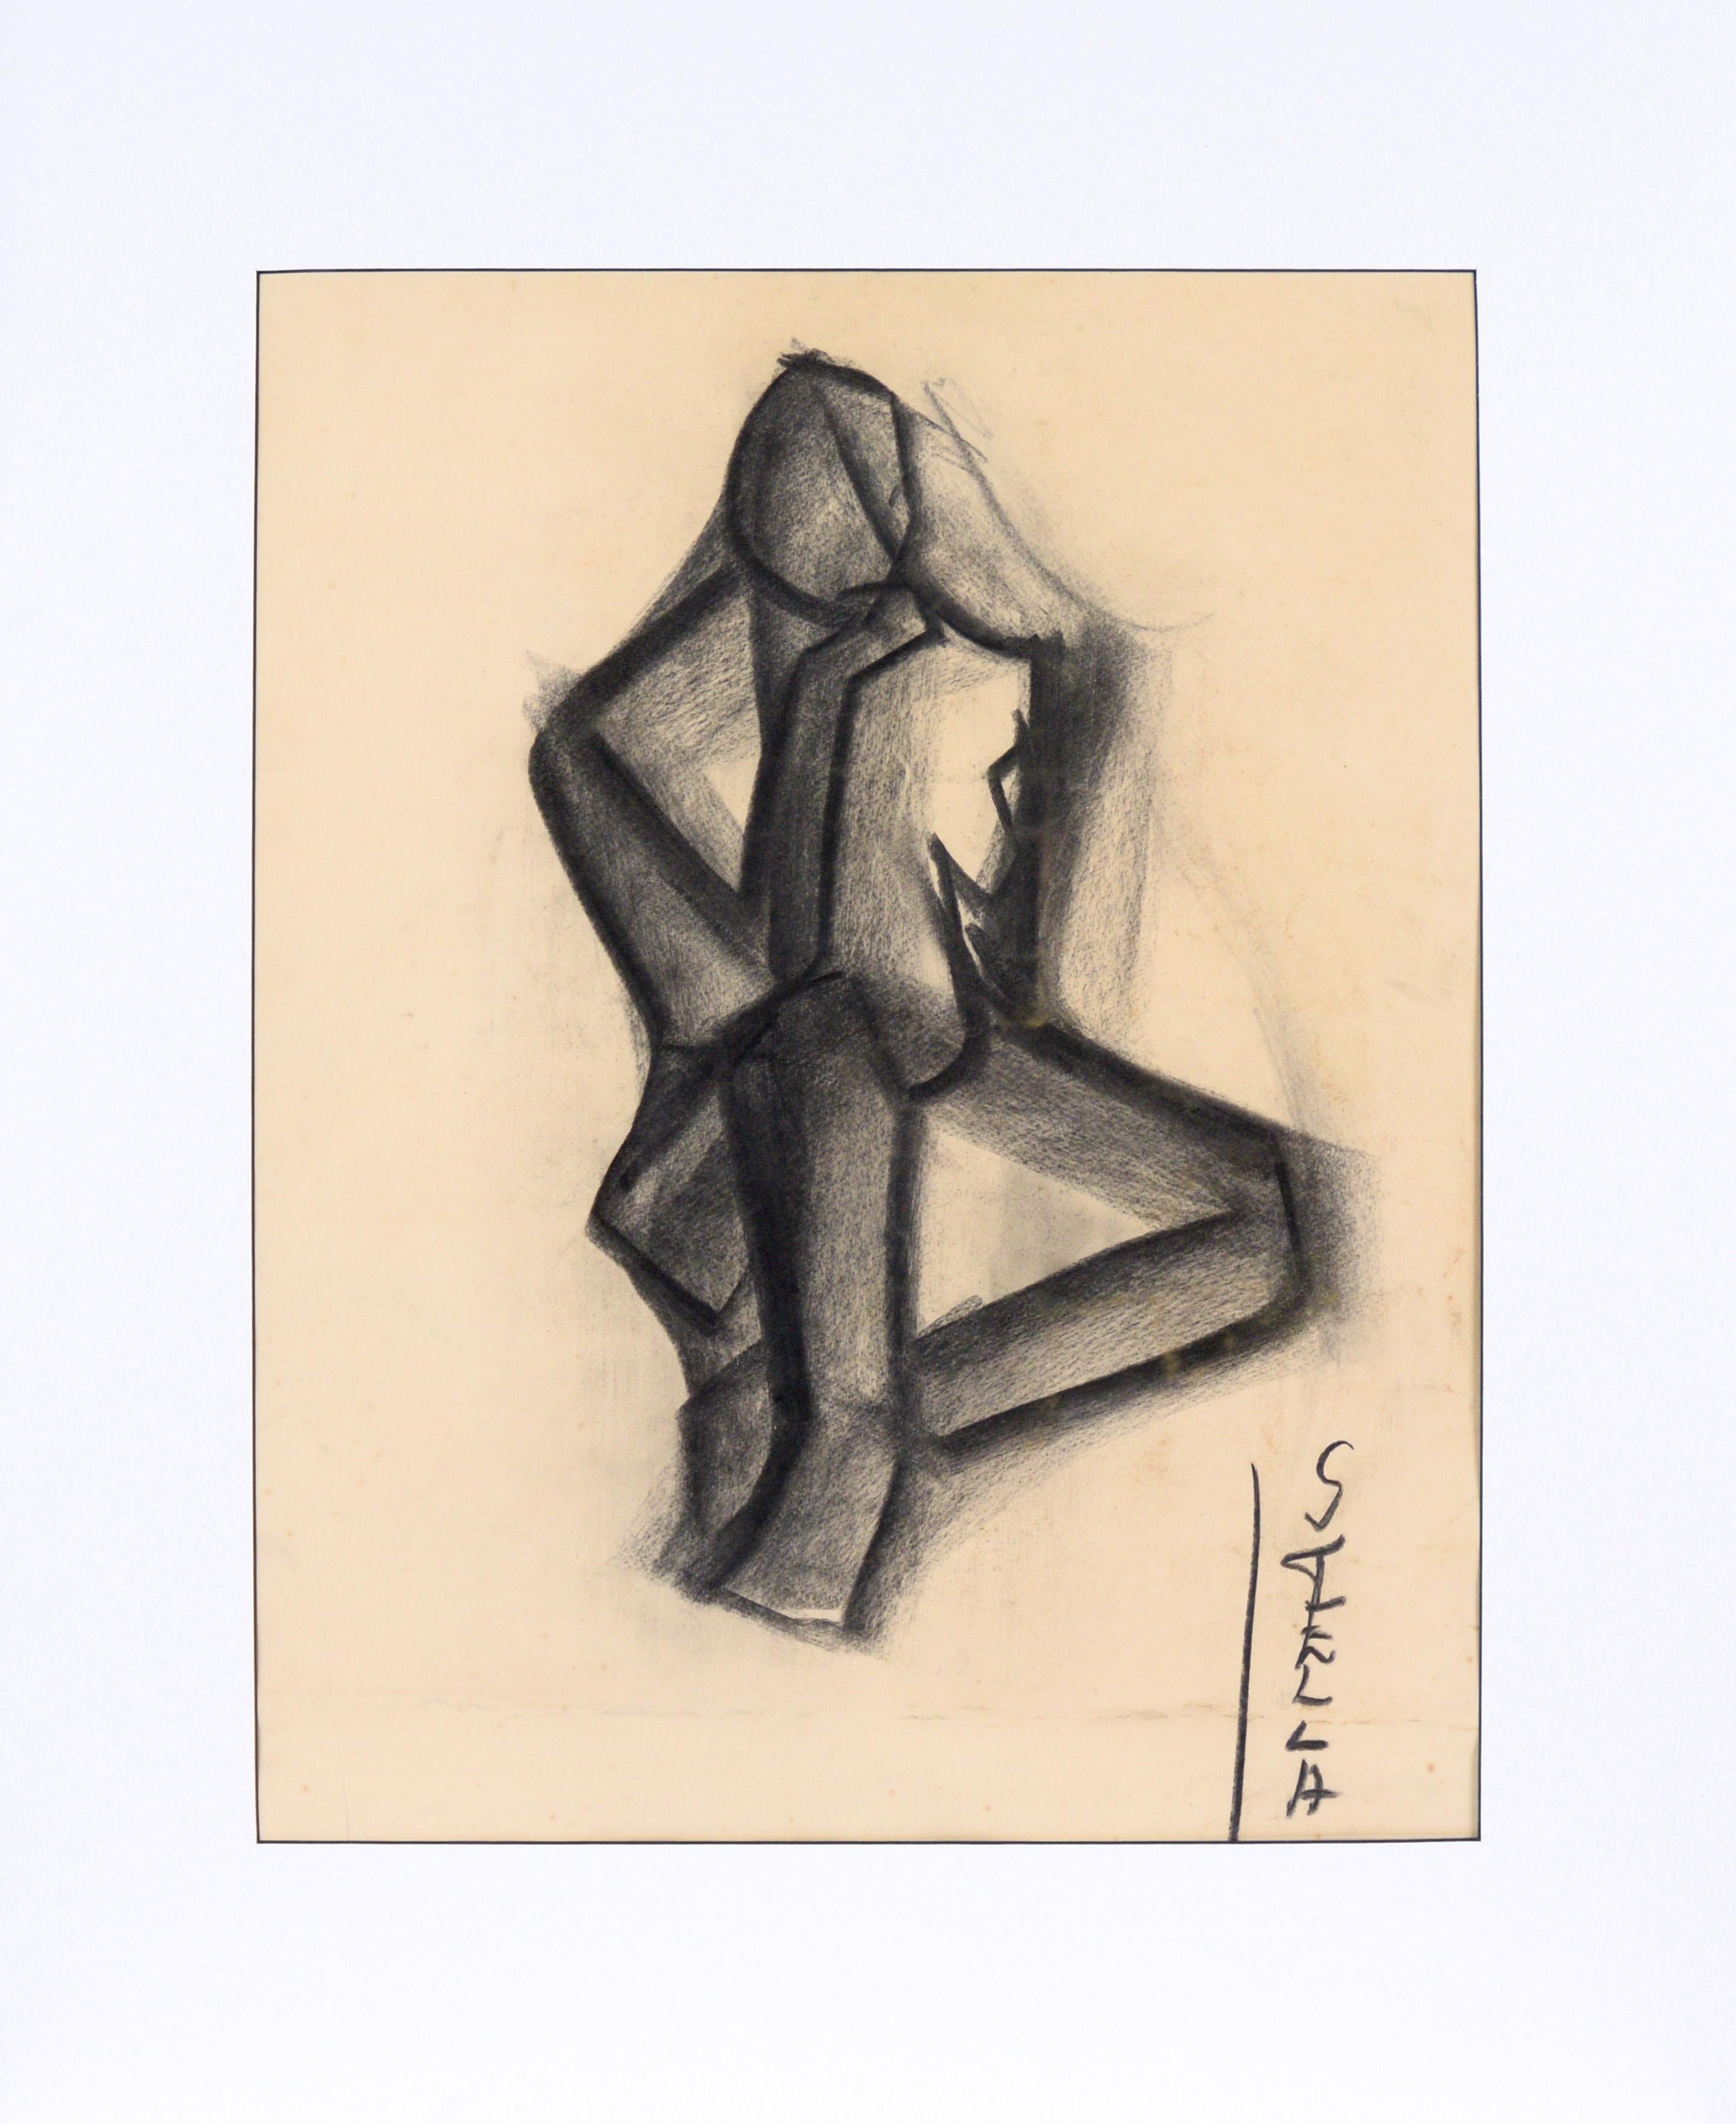 Unknown Figurative Art - Cubist Charcoal Figure Drawing on Paper